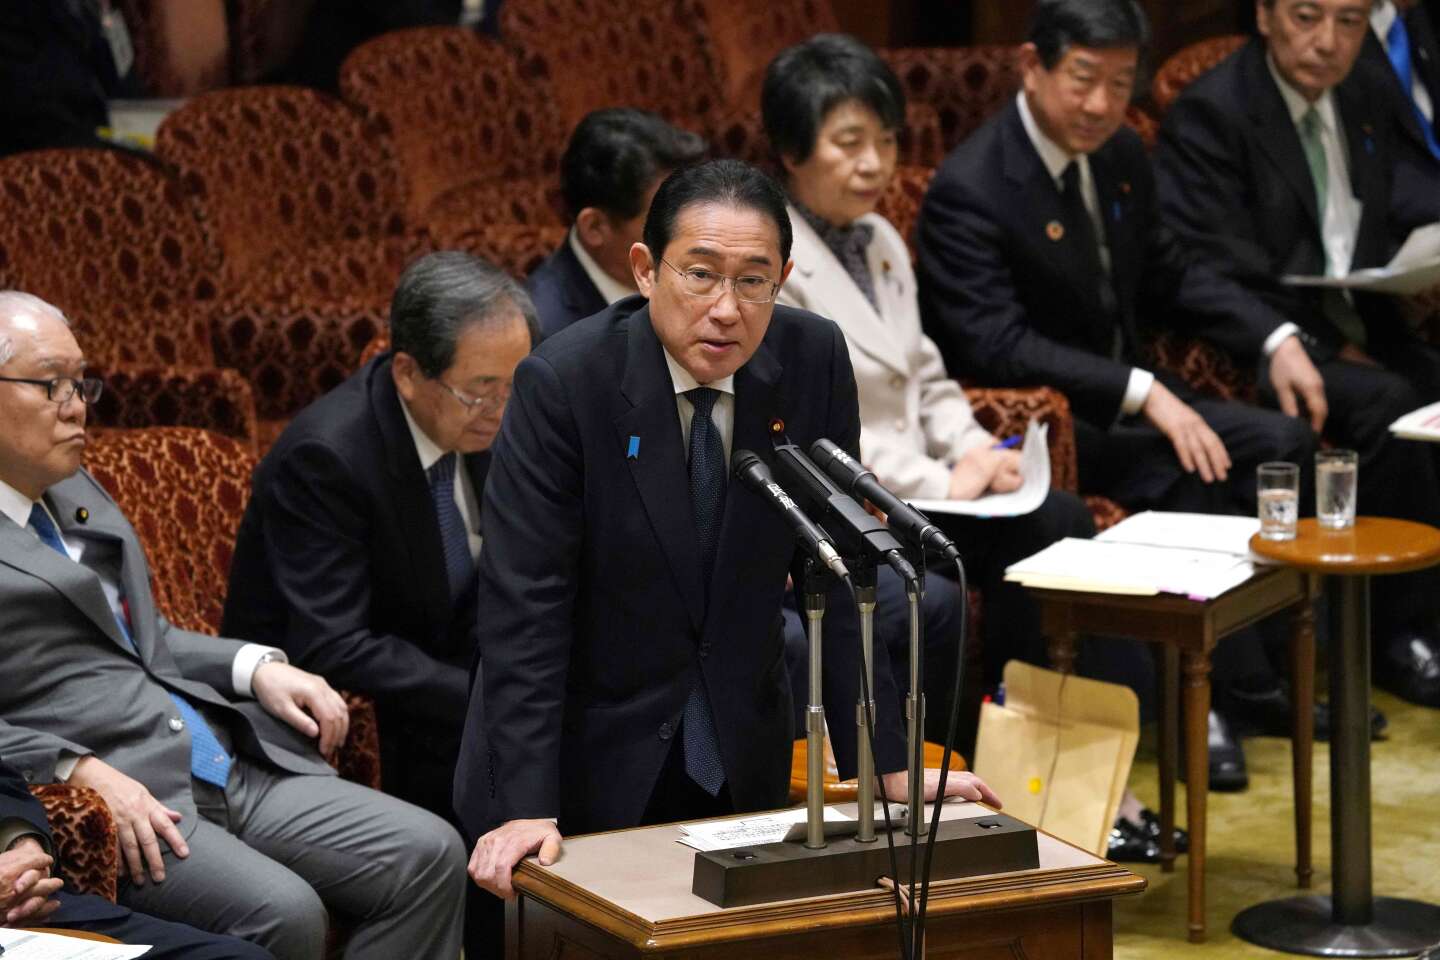 Japan is further easing its historic policy on military export restrictions